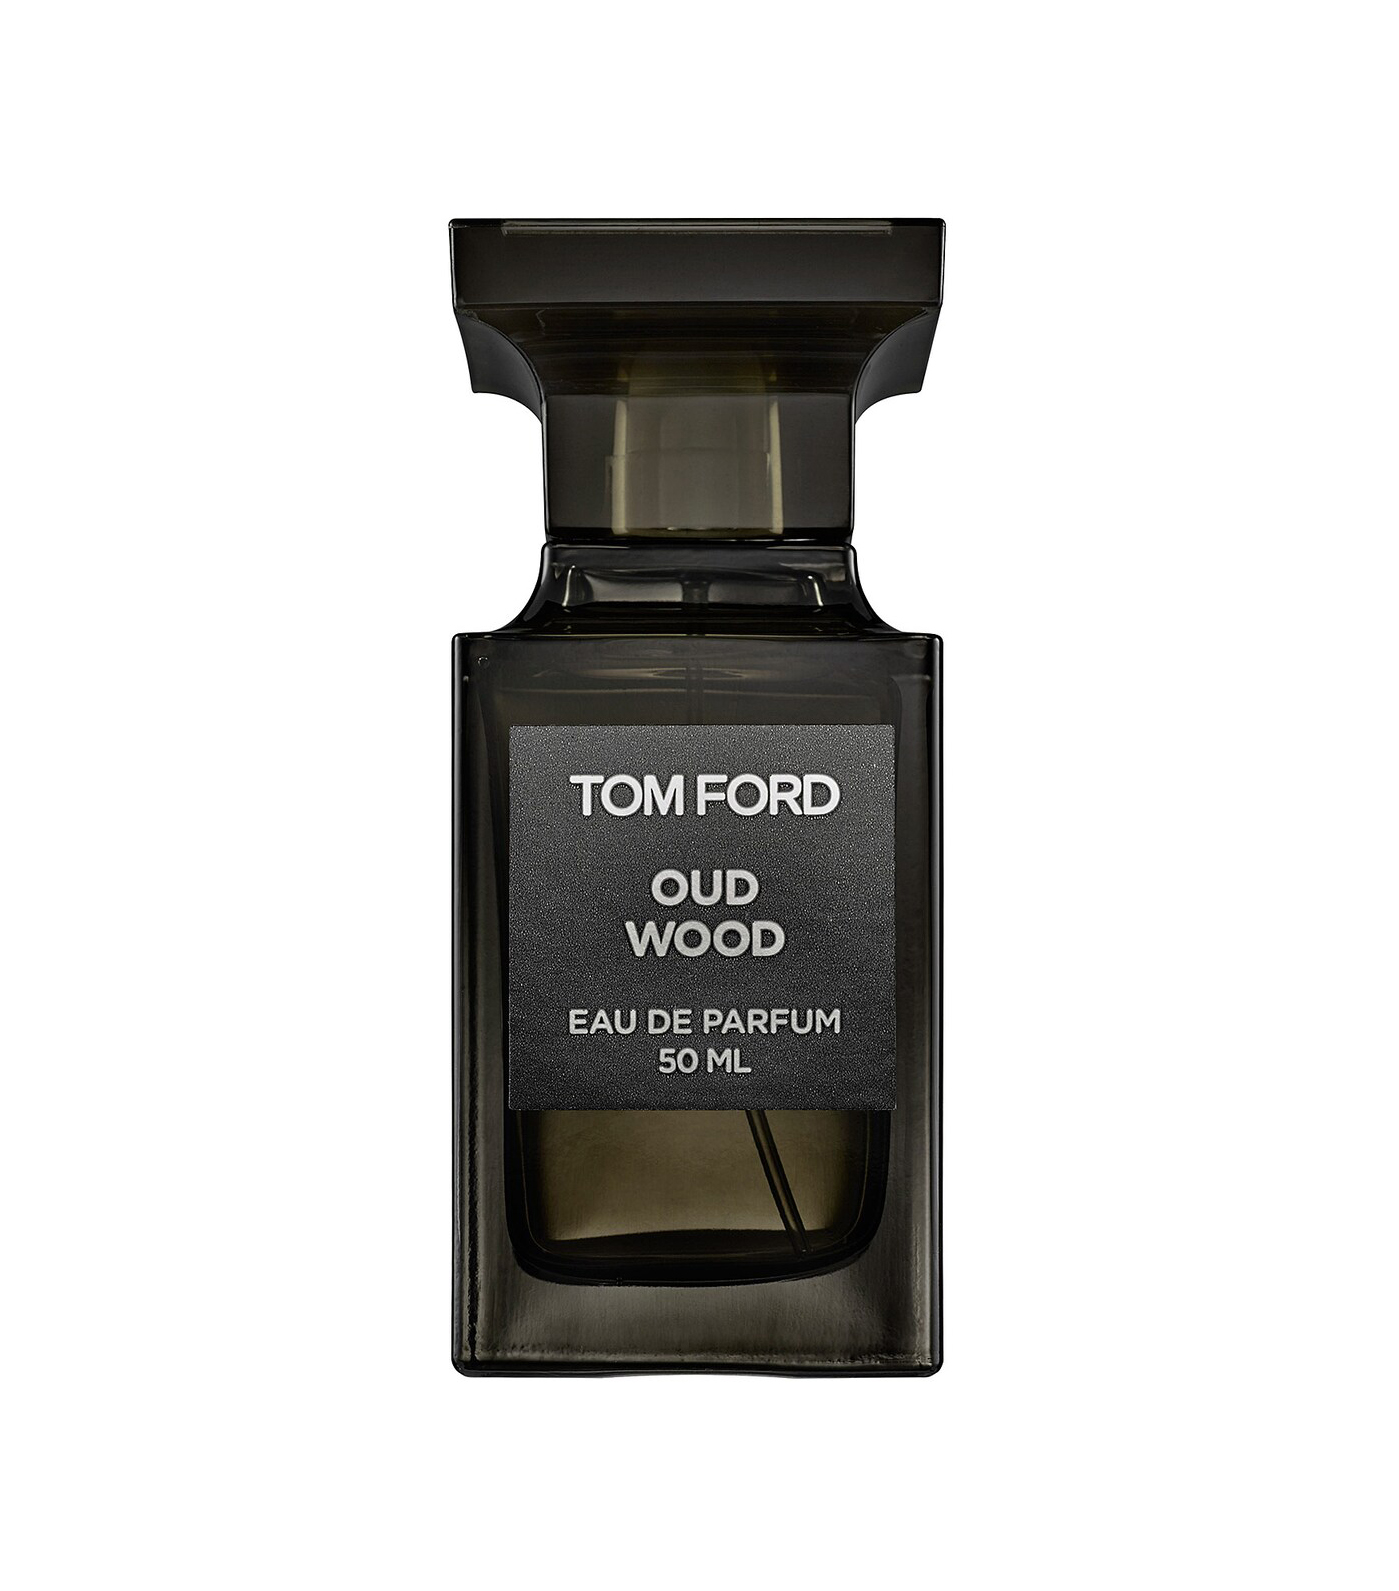 15 Woody Perfumes You'll Want to Try This Season | Who What Wear